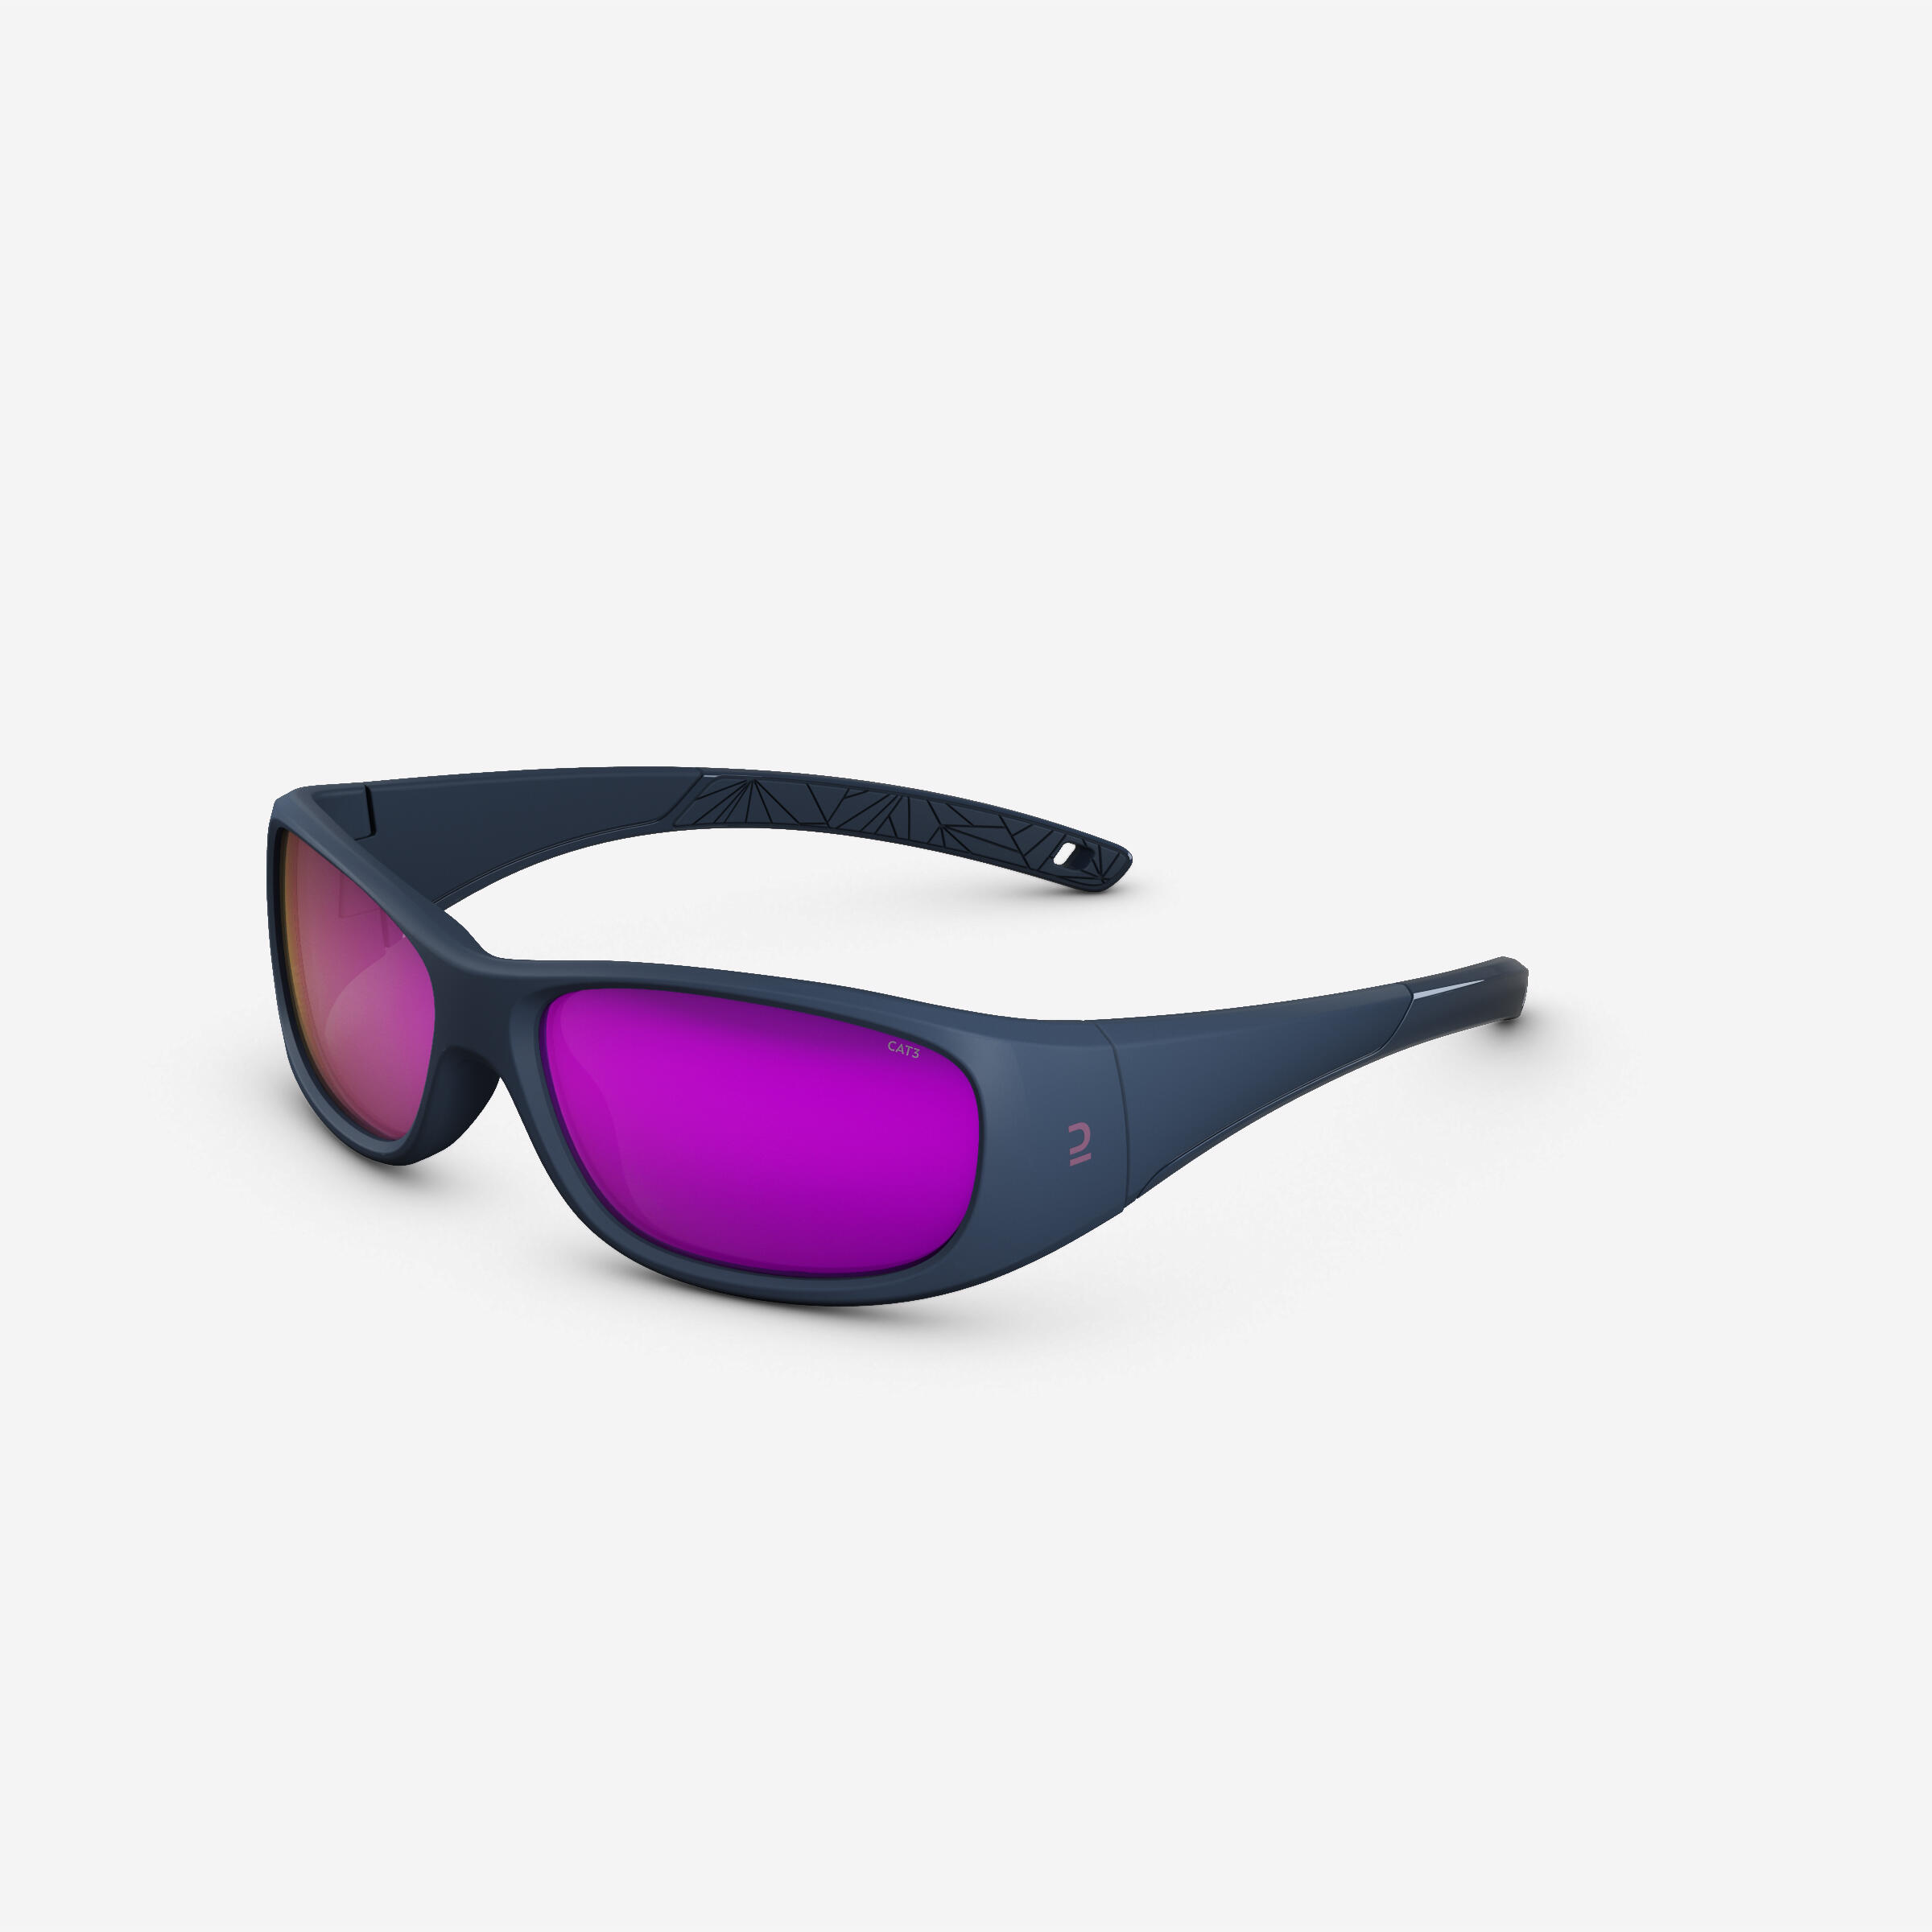 Buy Mountain Sunglasses Online In India|Category 3|Quechua